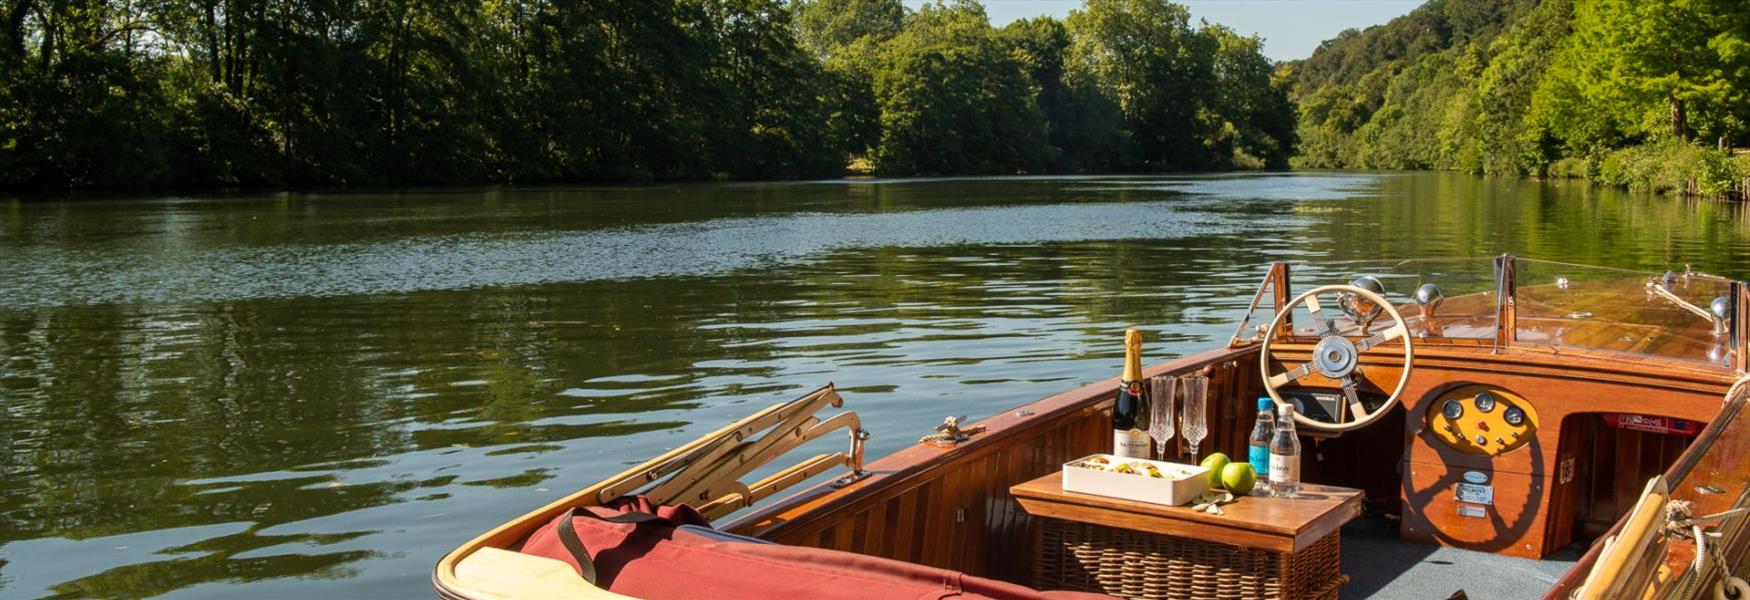 Boat picnic on the River Thames at Cliveden